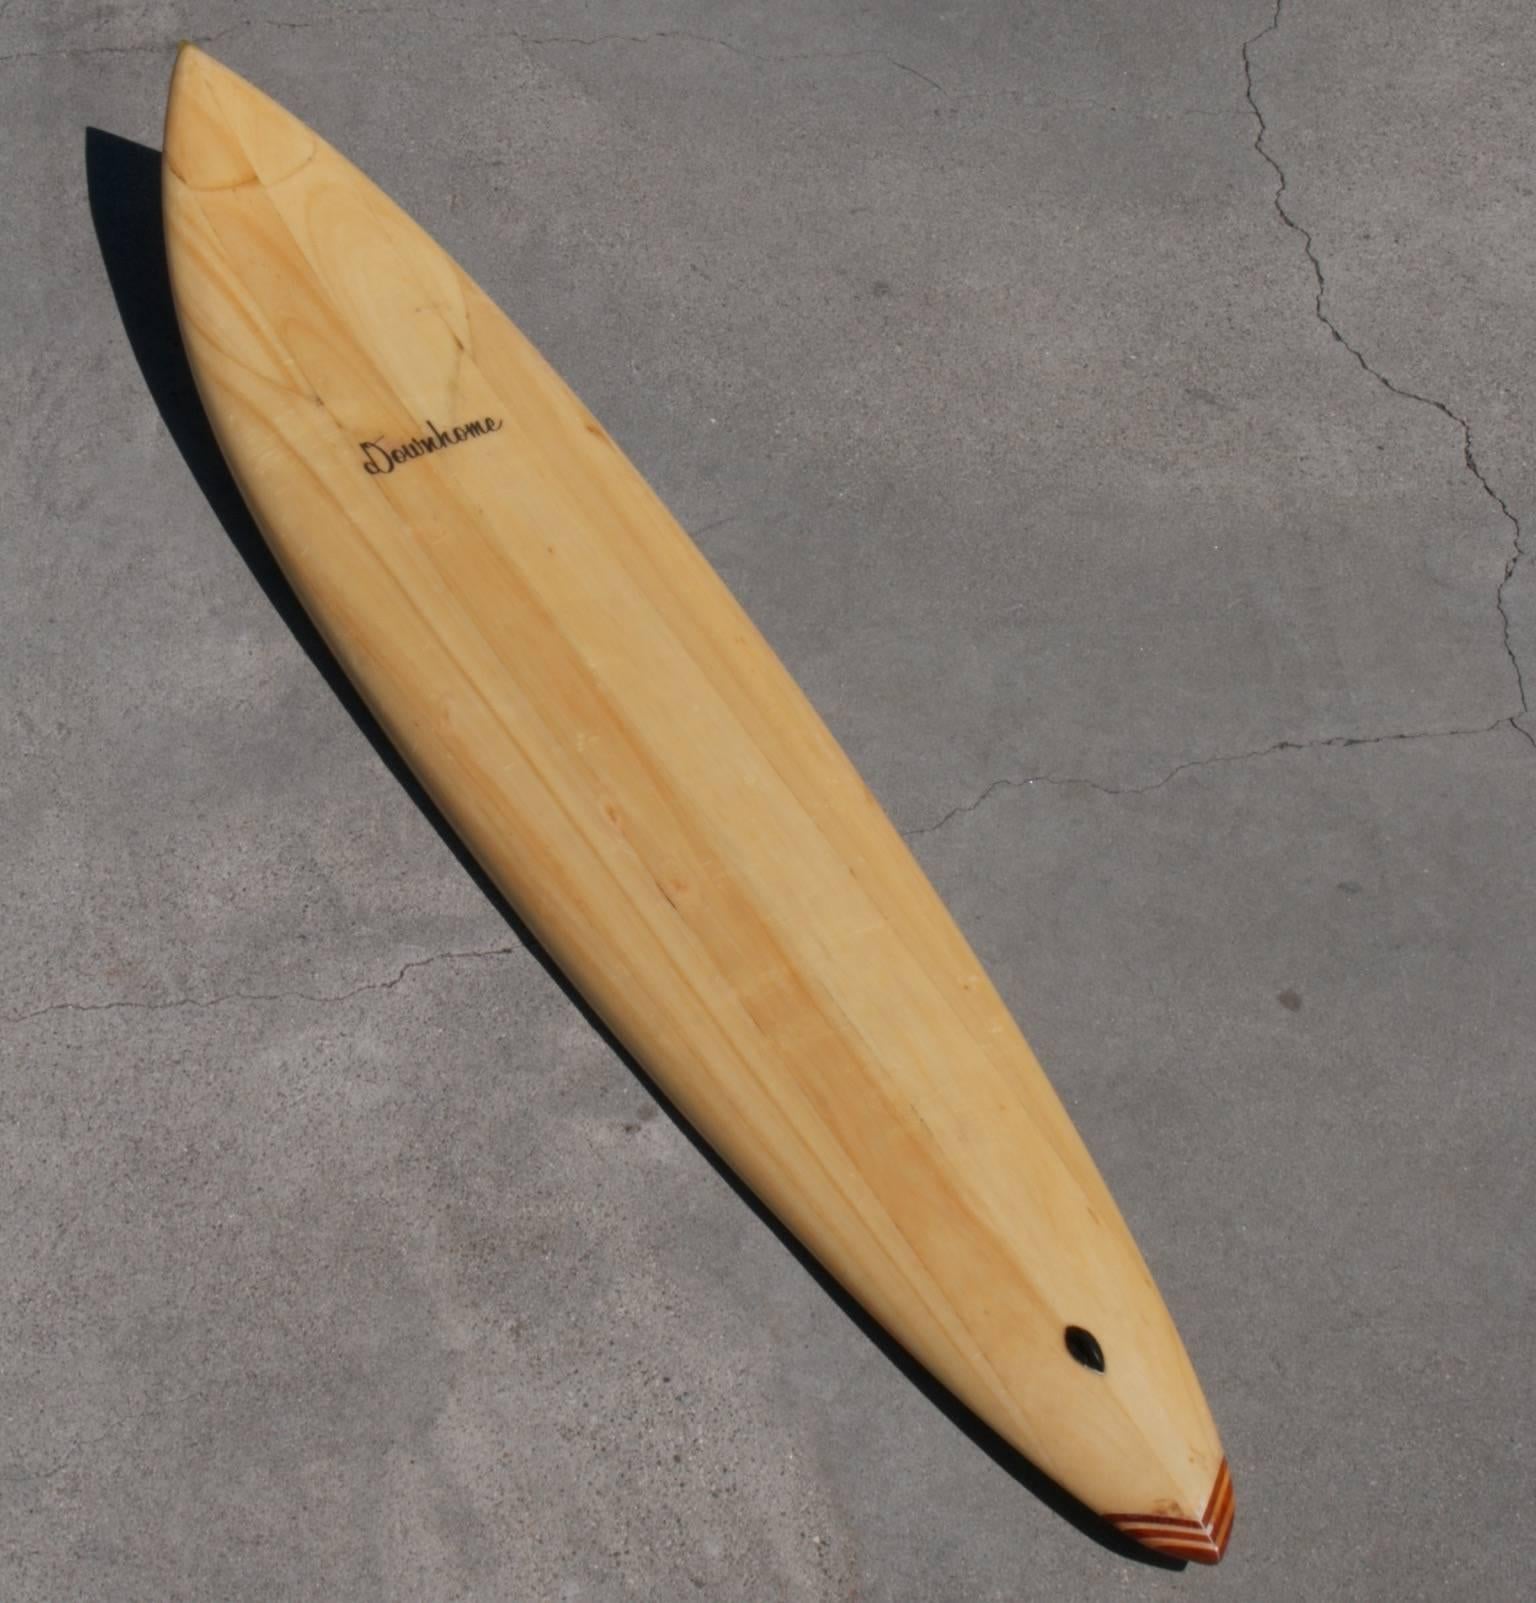 Balsa wood surfboard, Downhome shaped by Tom Gaglia, California, 1970s.
Elegant gun shaped board with stripes of alternating foam and wood used to create the tail block, down rails and good thickness, it screams 